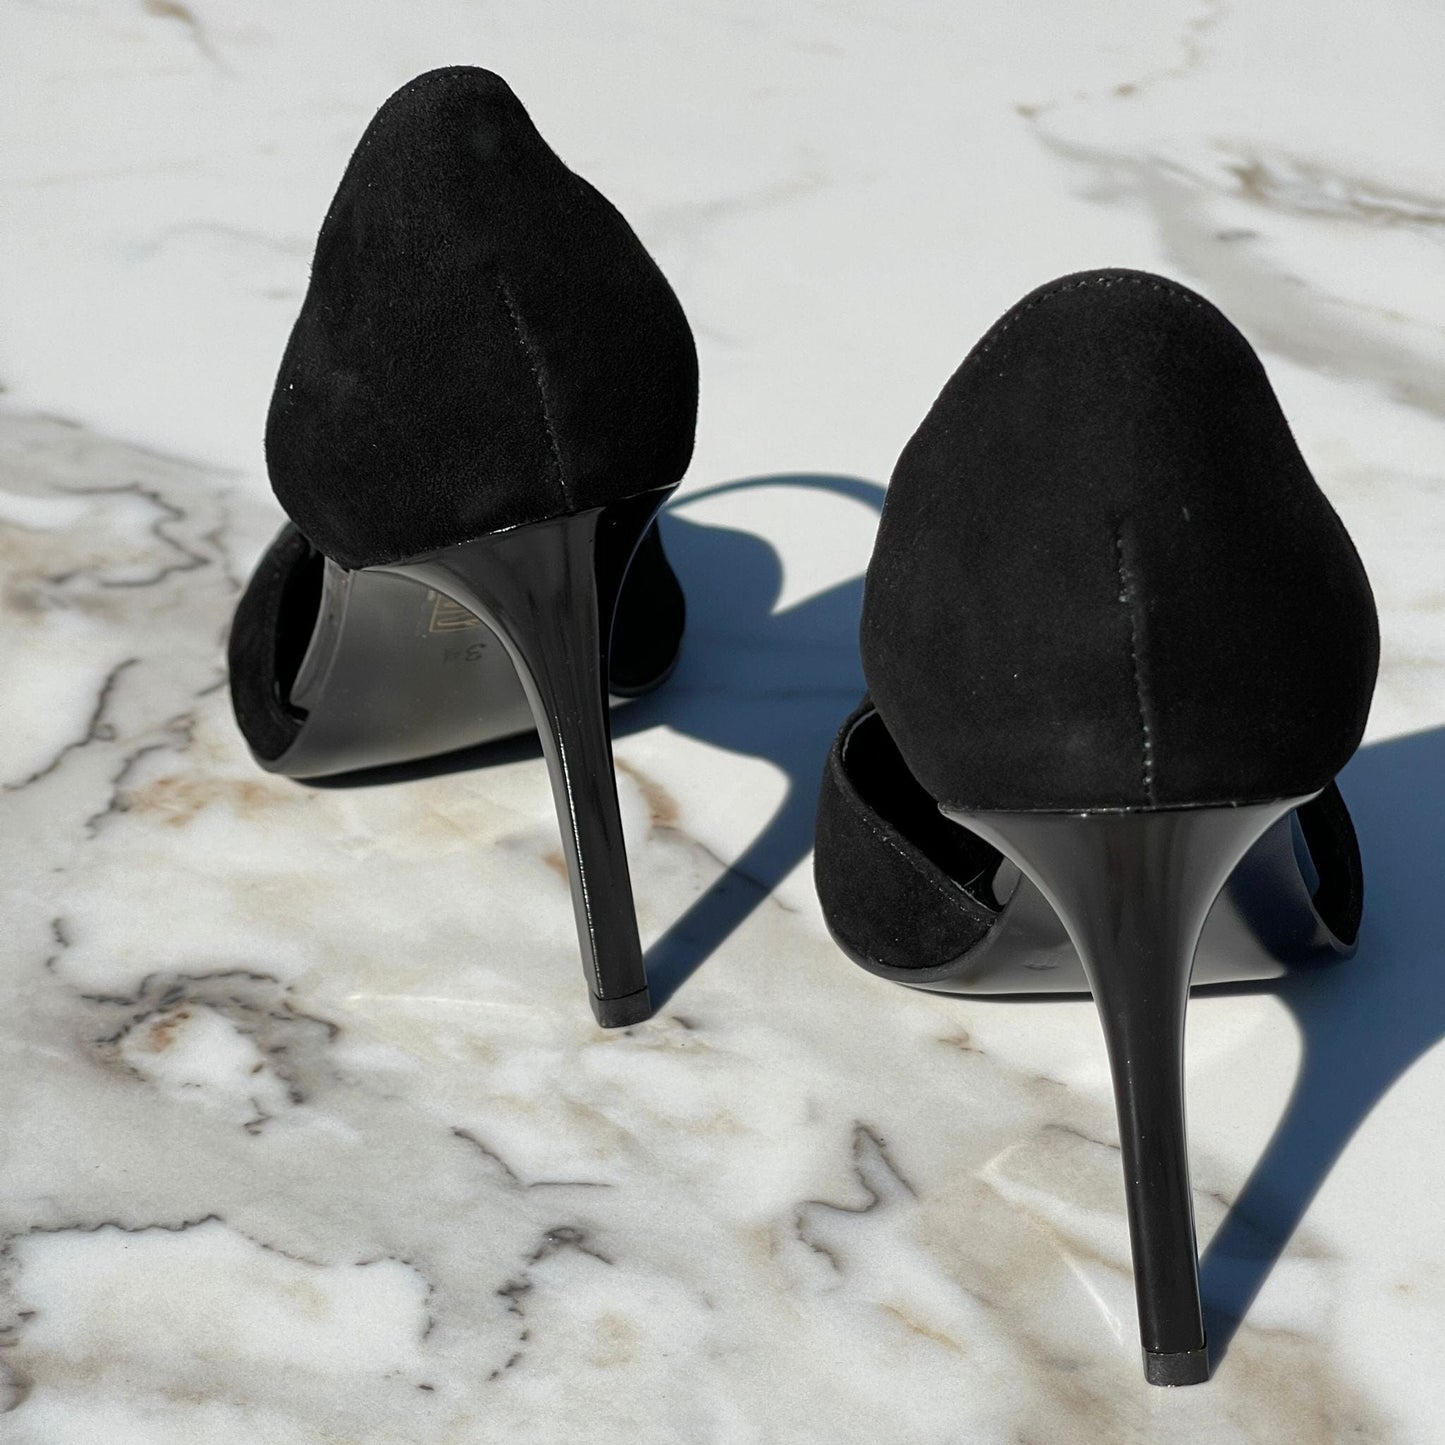 High heel court shoes is black suede